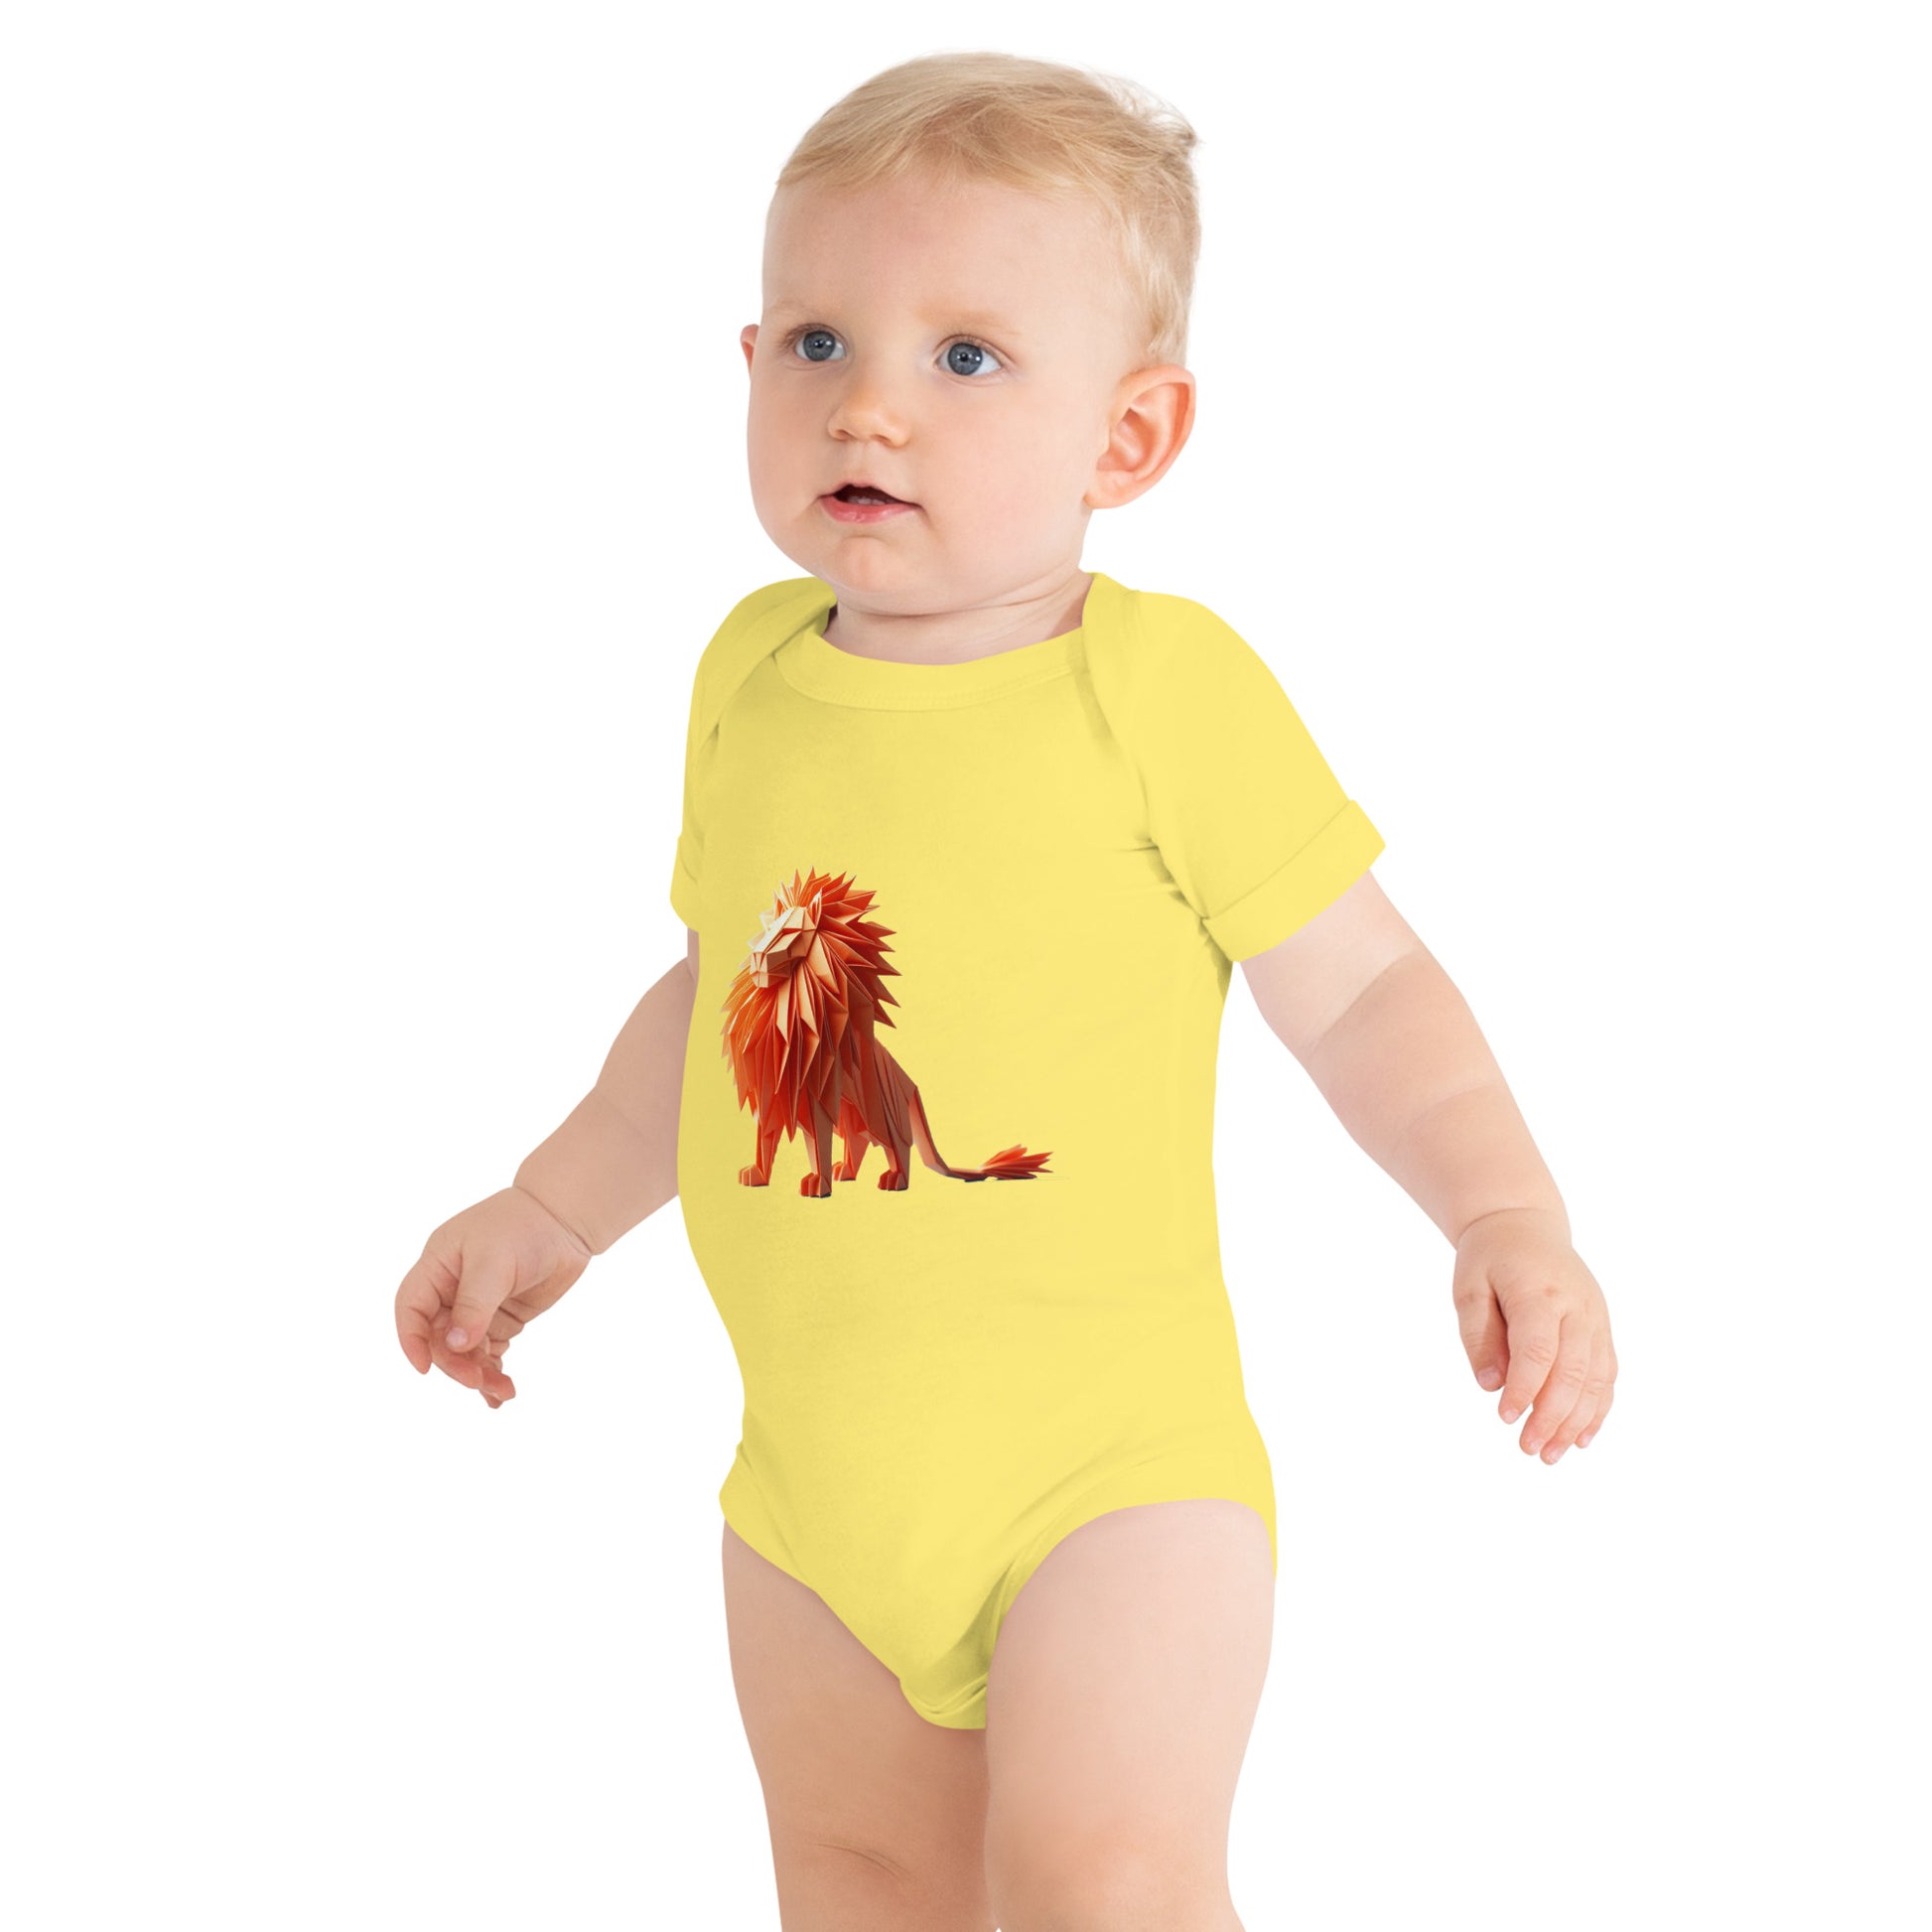 Baby with a yellow bodysuit with a print of a lion